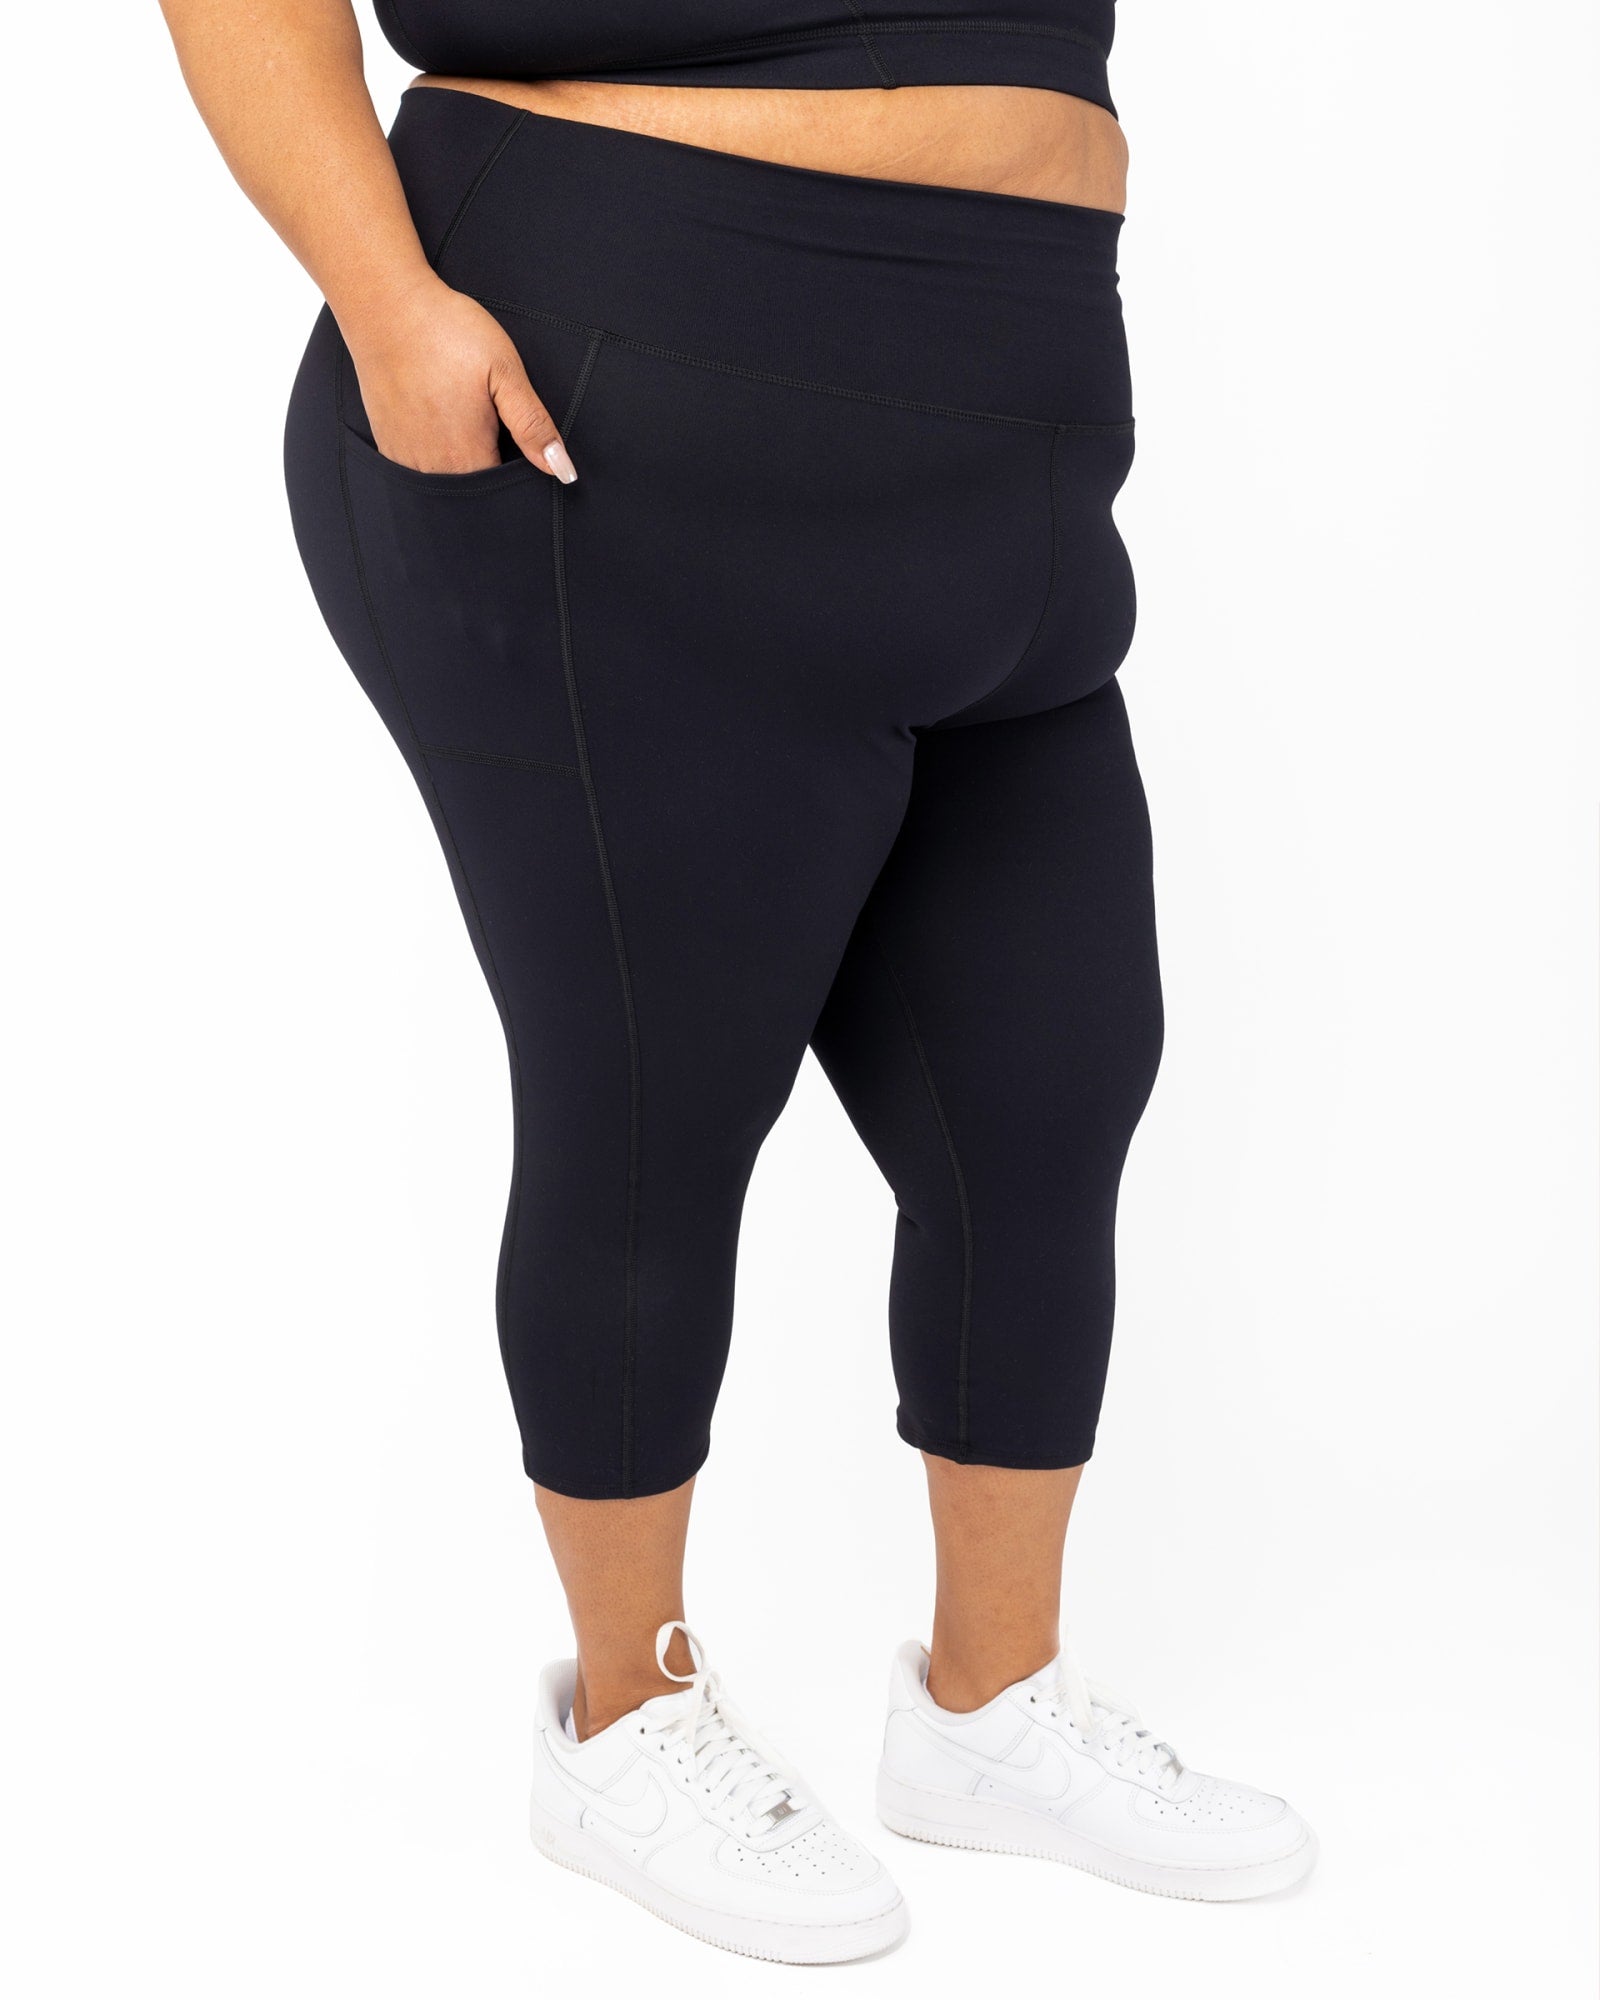 YUNAFFT Yoga Pants for Women Clearance Plus Size Fashion Casual Women Solid  Span Ladies High Waist Wide Leg Trousers Yoga Pants Full Pants 